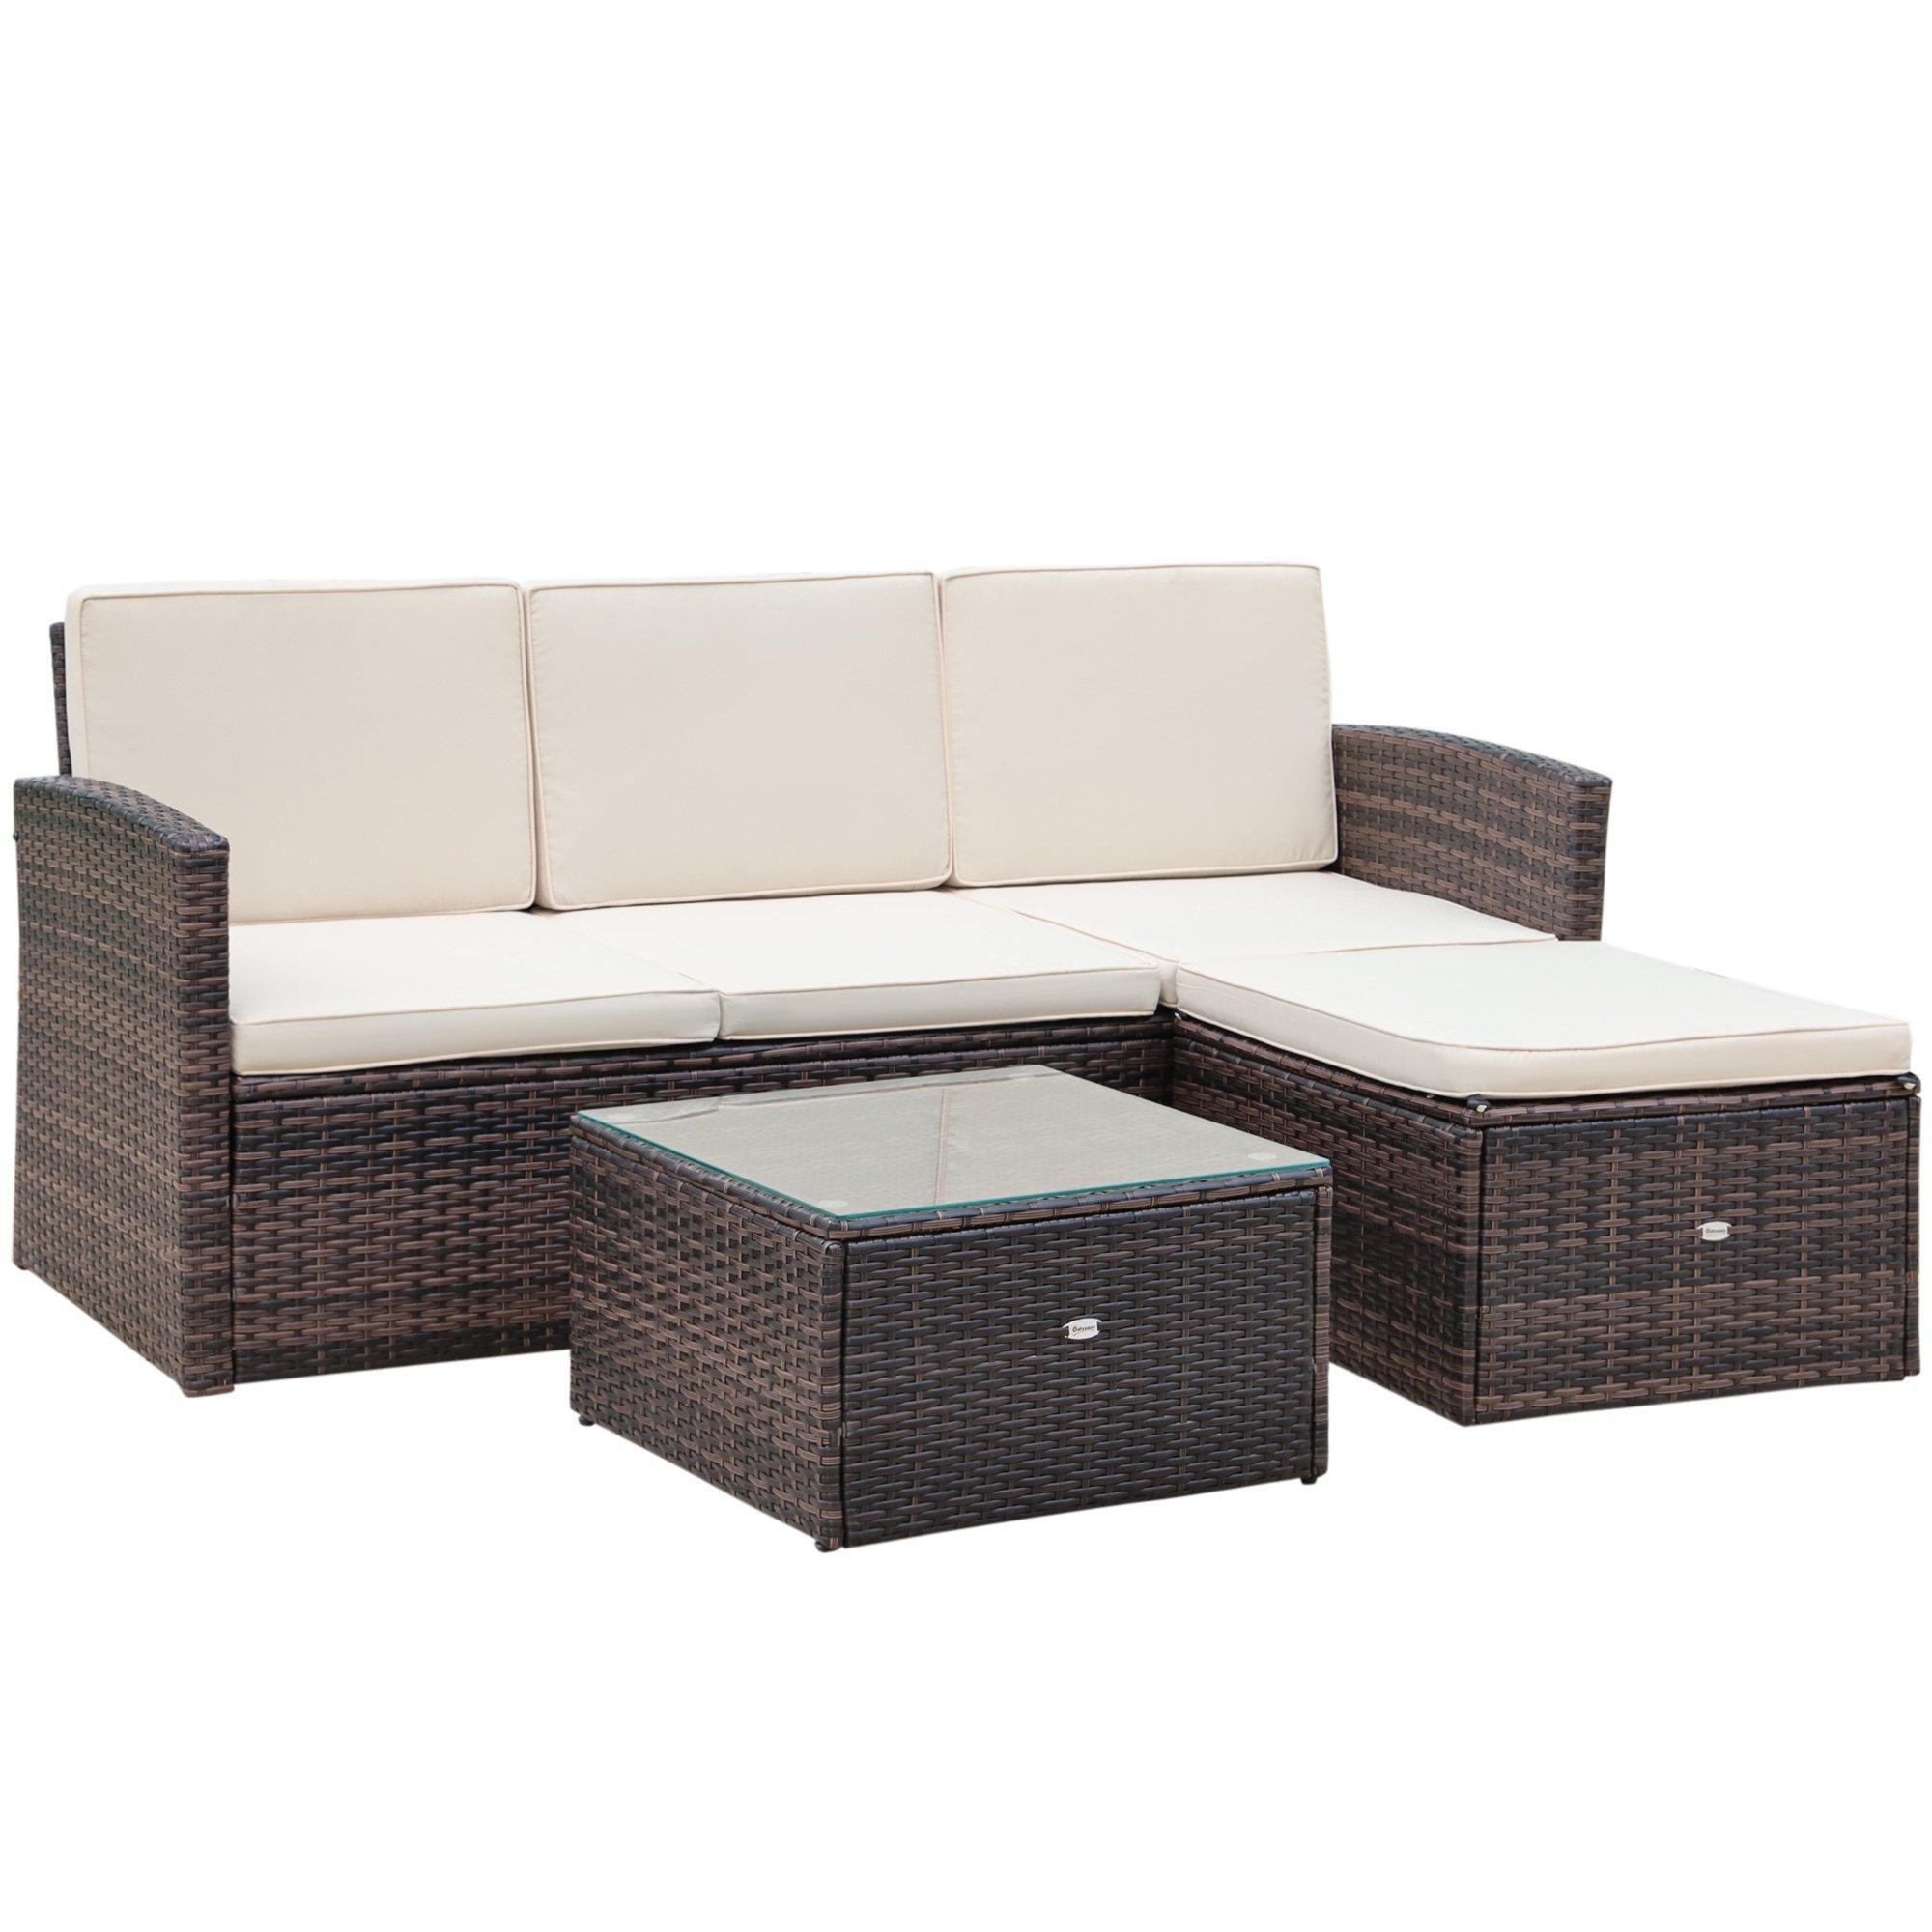 3PC Outdoor Patio Furniture Set Wicker Rattan 3-Seater Sofa Chair Couch - image 1